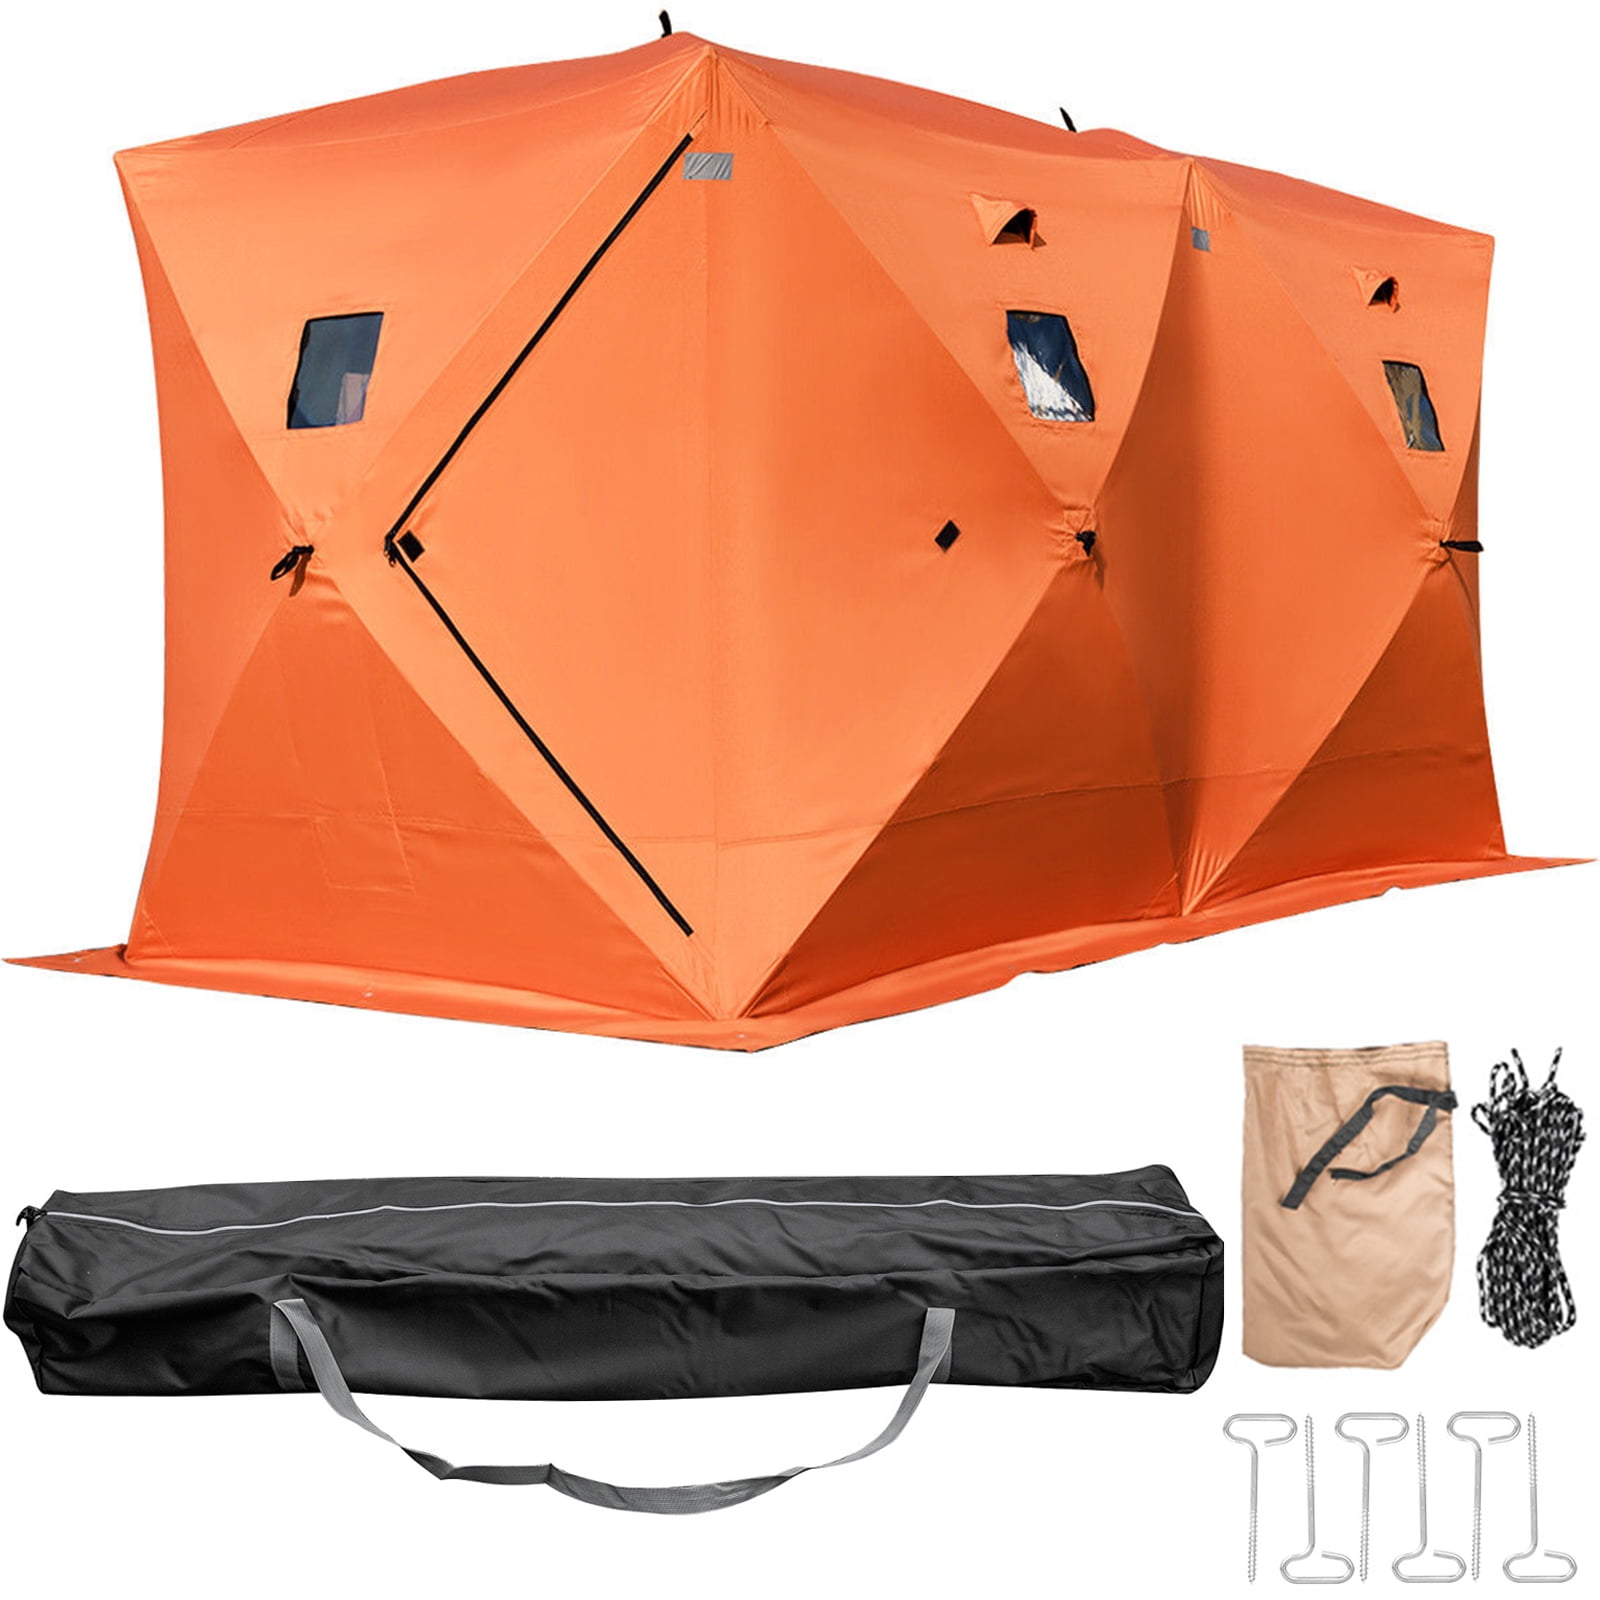 SKYSHALO 8 Person Ice Fishing Shelter, Pop-Up Portable Insulated